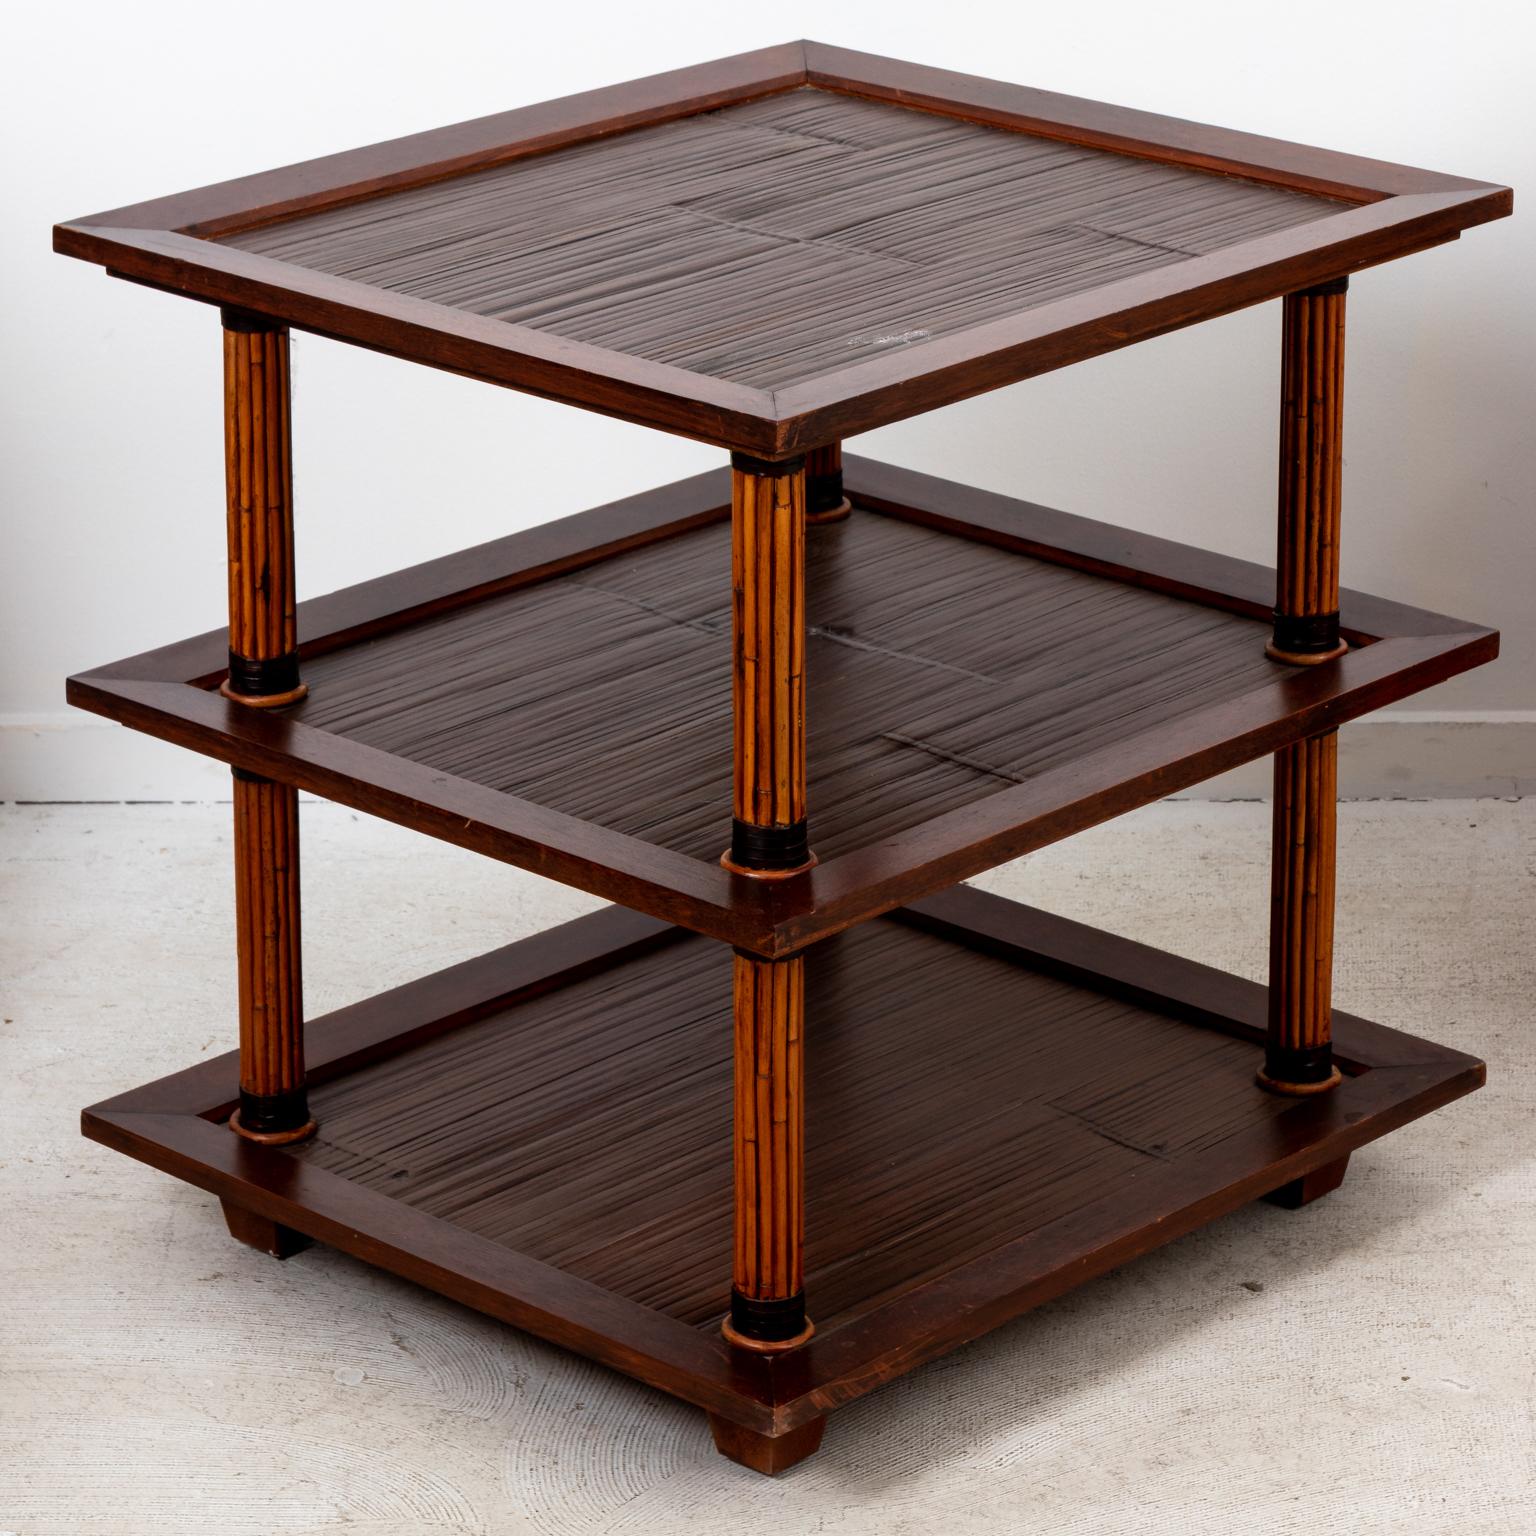 Circa 1980s pair of two tier side tables in the Palm Beach Regency style with bamboo columns and surfaces with Mahogany edges. The tables also features leather wrapped detail around the columns. Made in the Philippines. Please note of wear